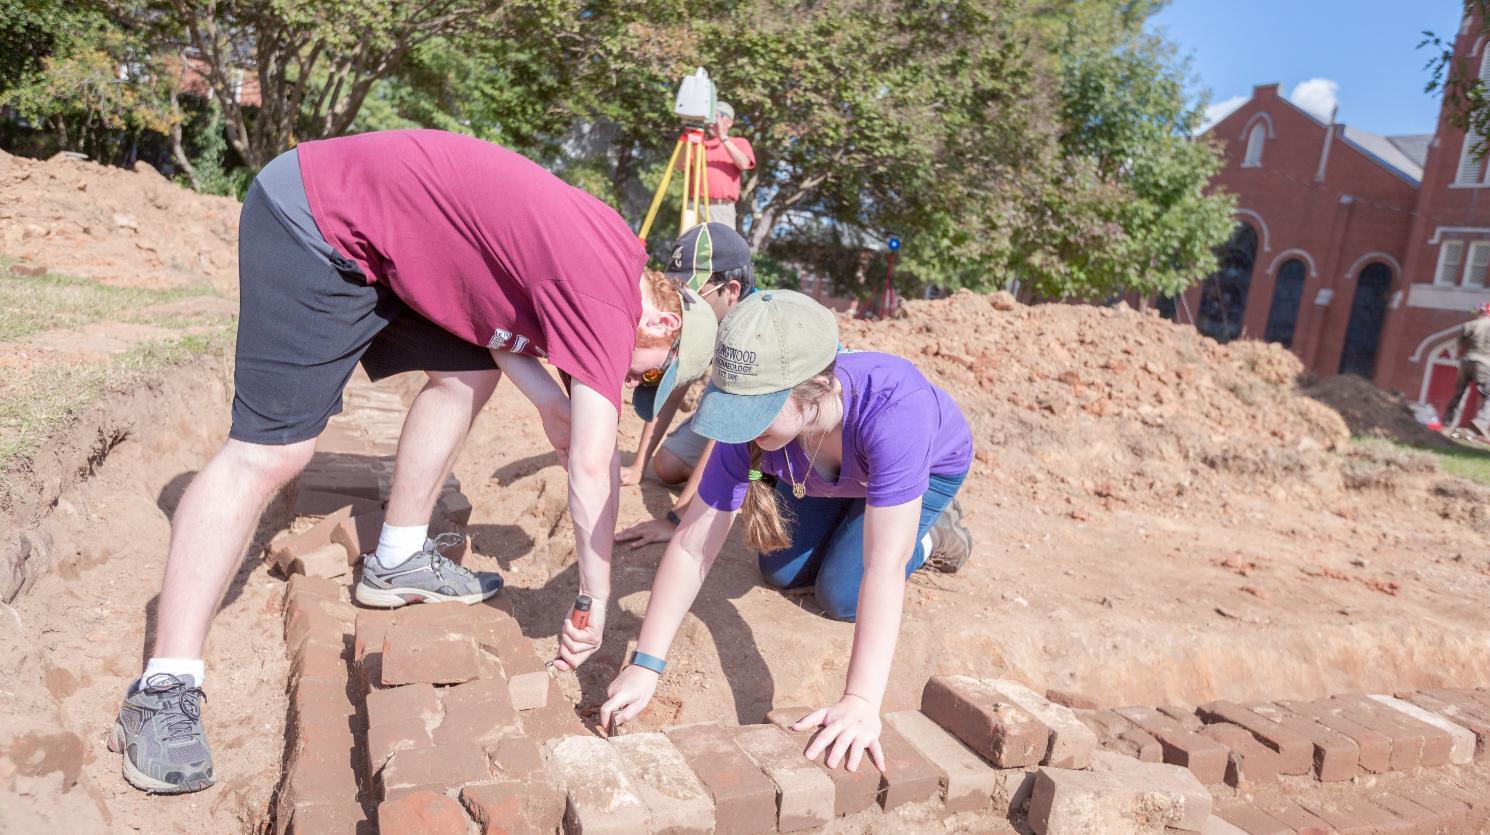 In a class-related archaeology survey, Ashton Chandler ’18, an anthropology major from Leesburg, and Jessica Keaton ’17, an anthropology major from Forest, uncover the foundation of the Richardson House in Bicentennial Park, which stood where the new admissions building will be built.